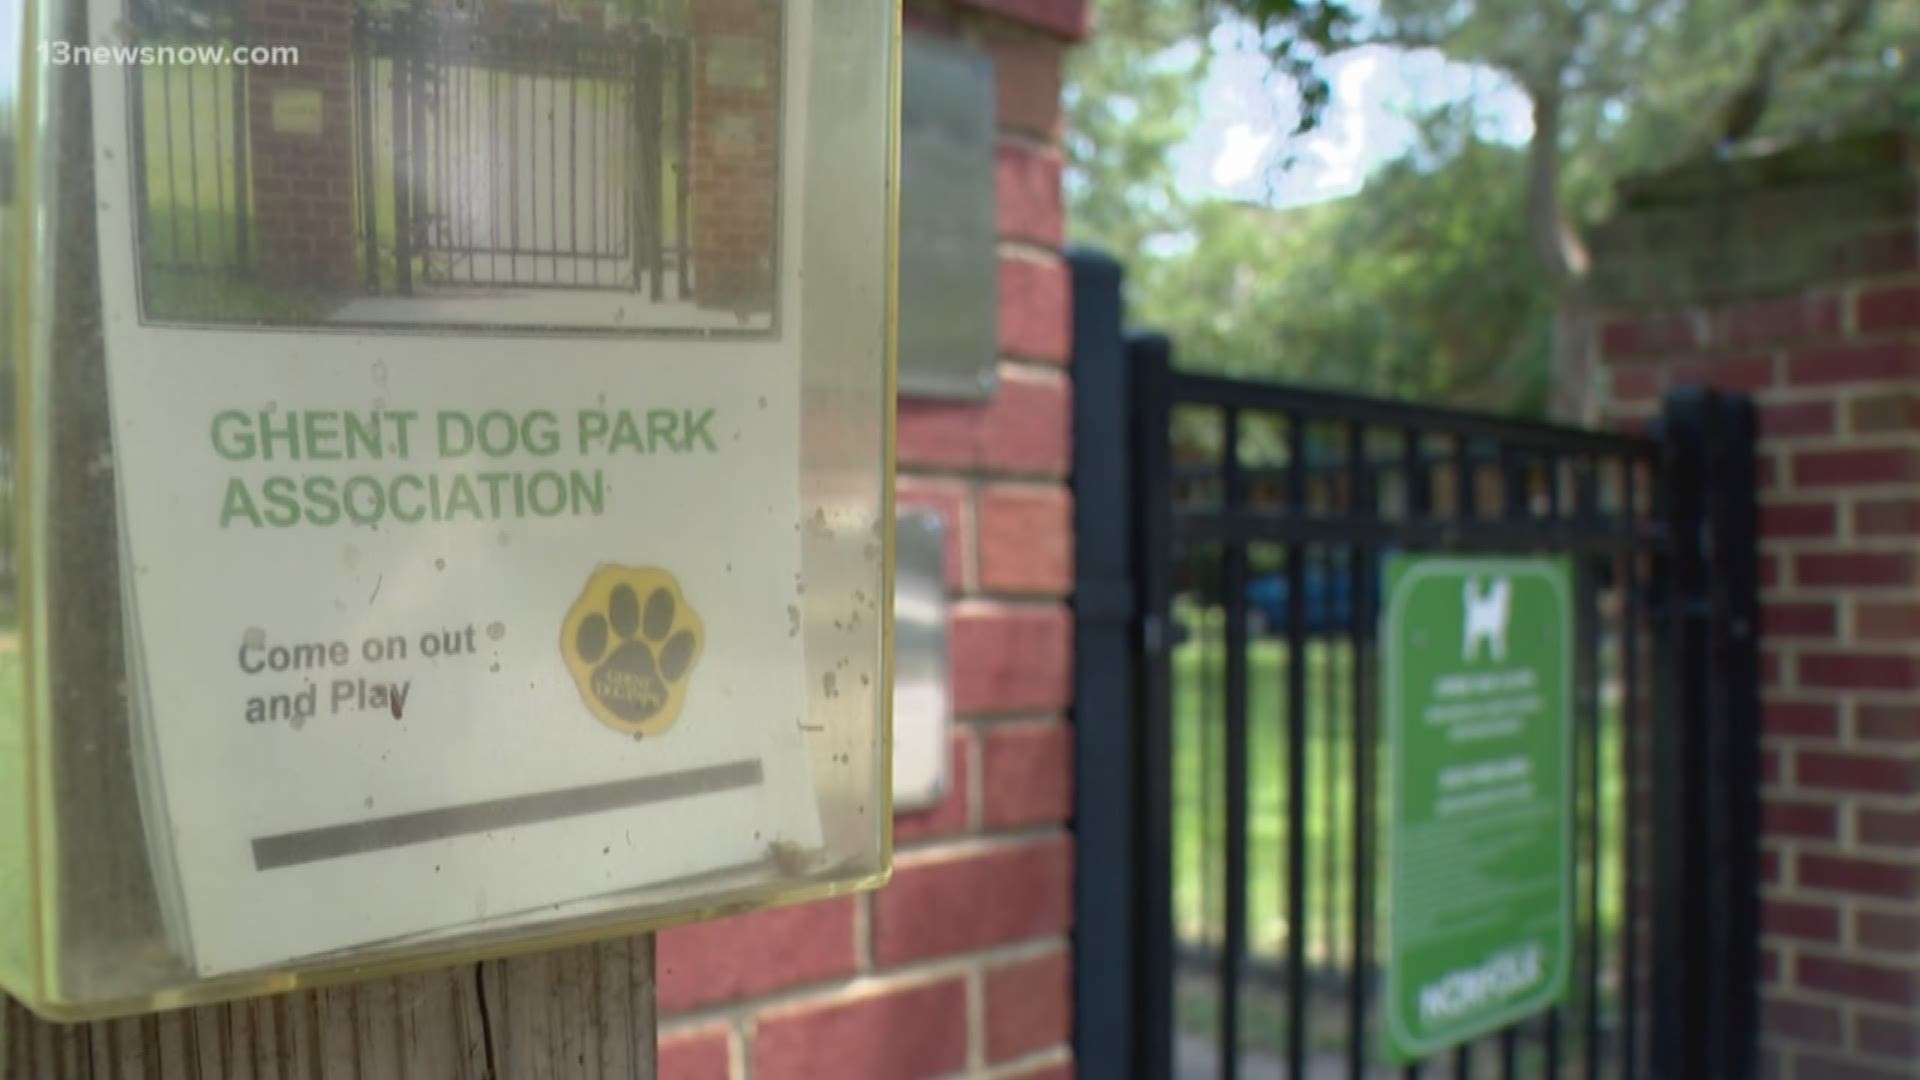 Several dog owners were cited for having their dogs at a Norfolk dog park after hours. The park closed at 7:30 p.m., even before the sun went down.